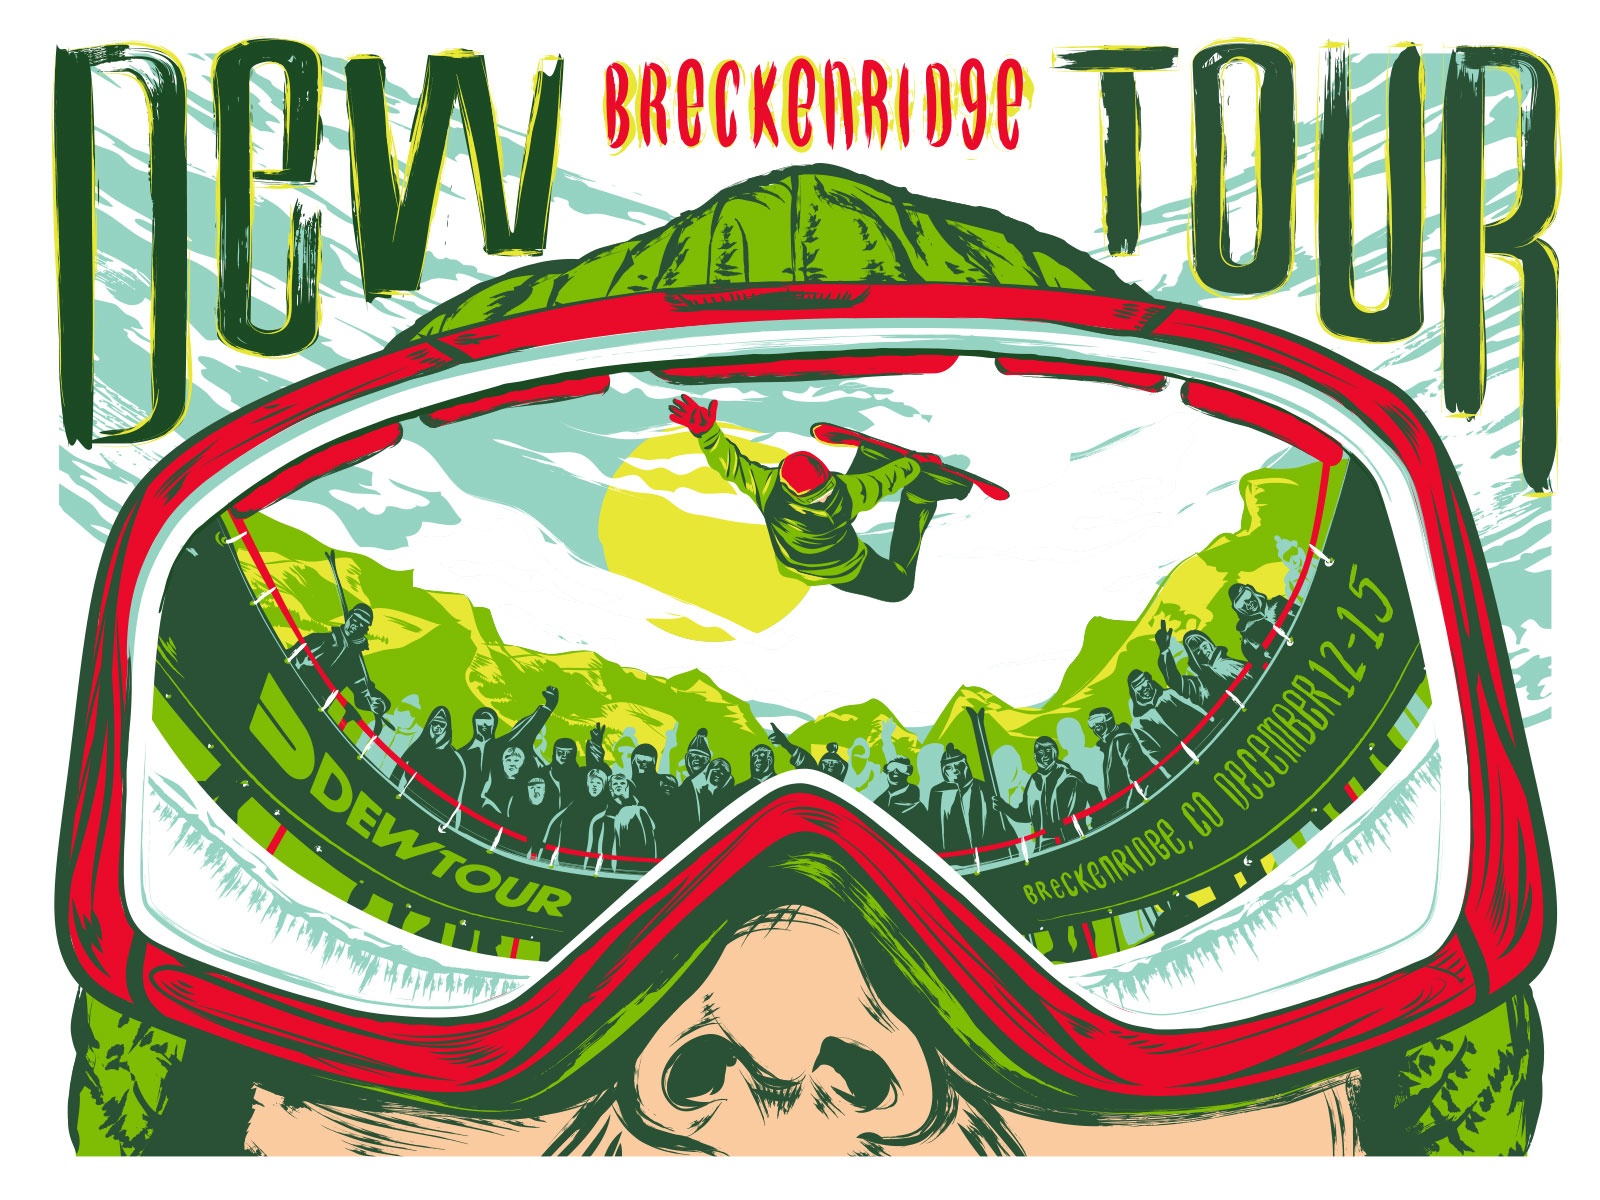 Breckenridge Dew Tour Poster by ChangeTheThought on Dribbble